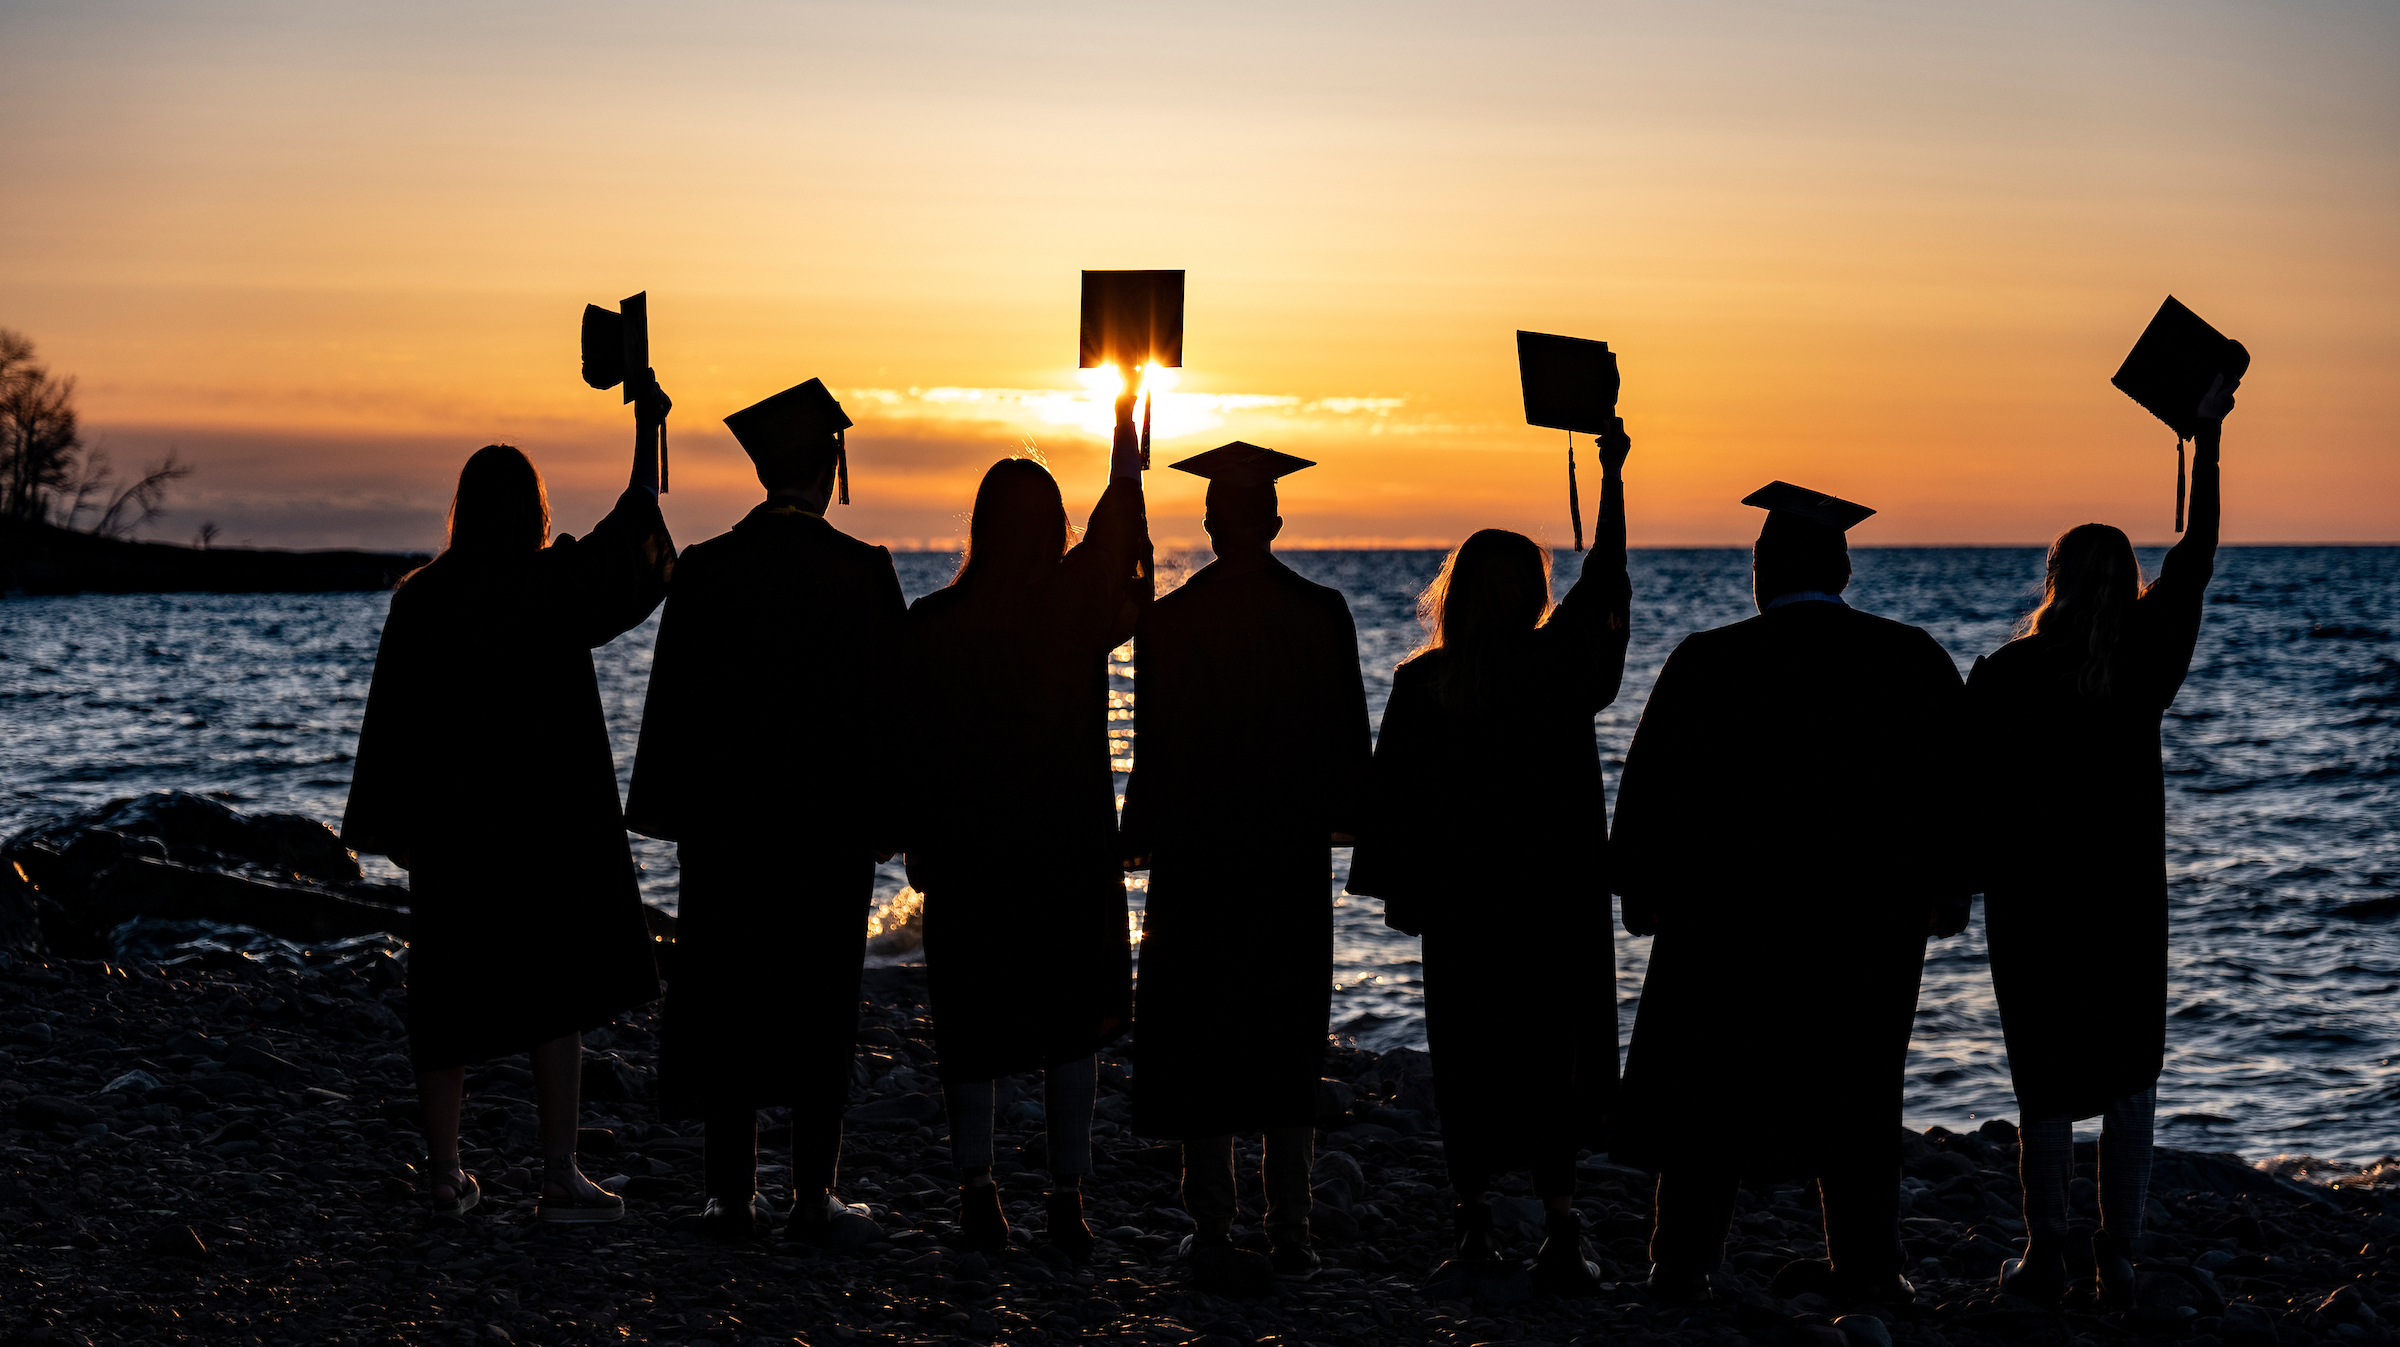 Seven students in cap and gown facing the sunrise over Lake Superior, with four waving their caps.